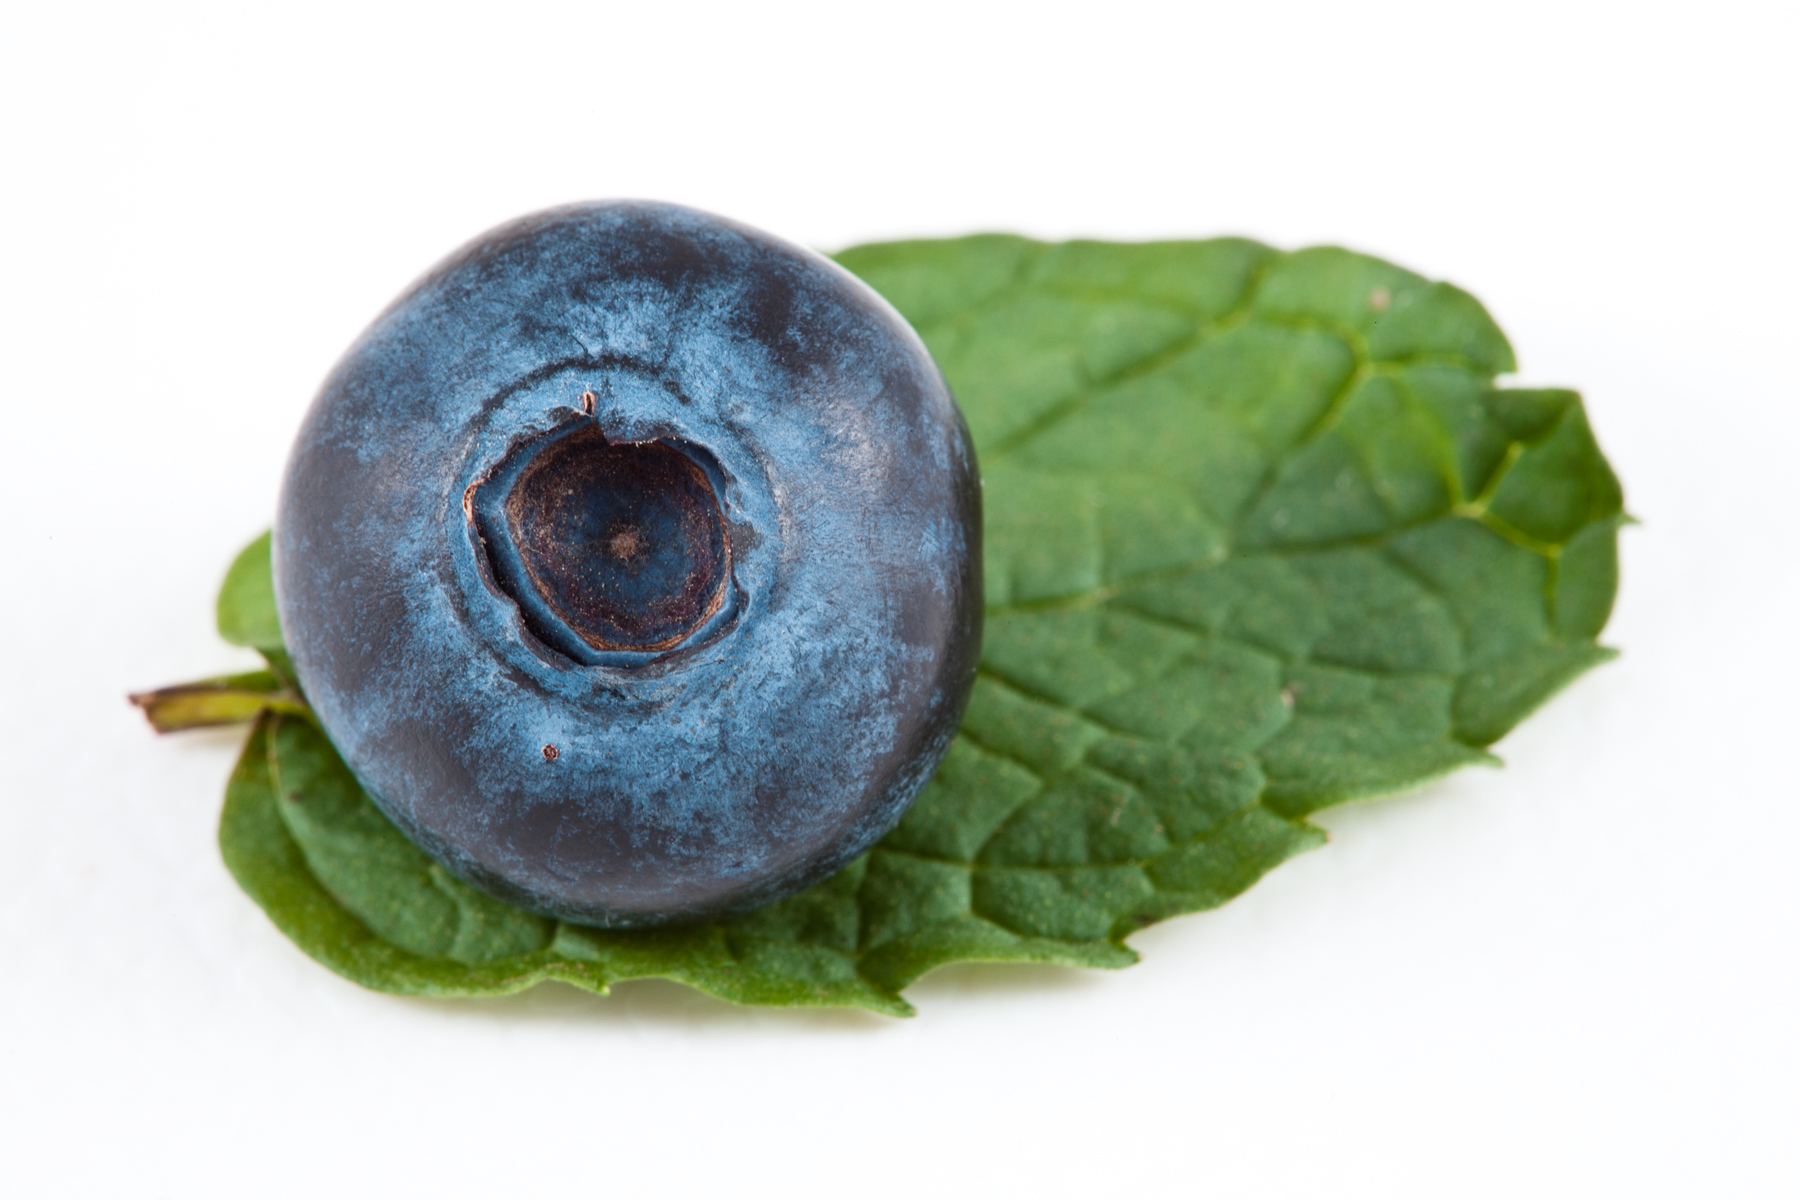 Blueberry and mint photo